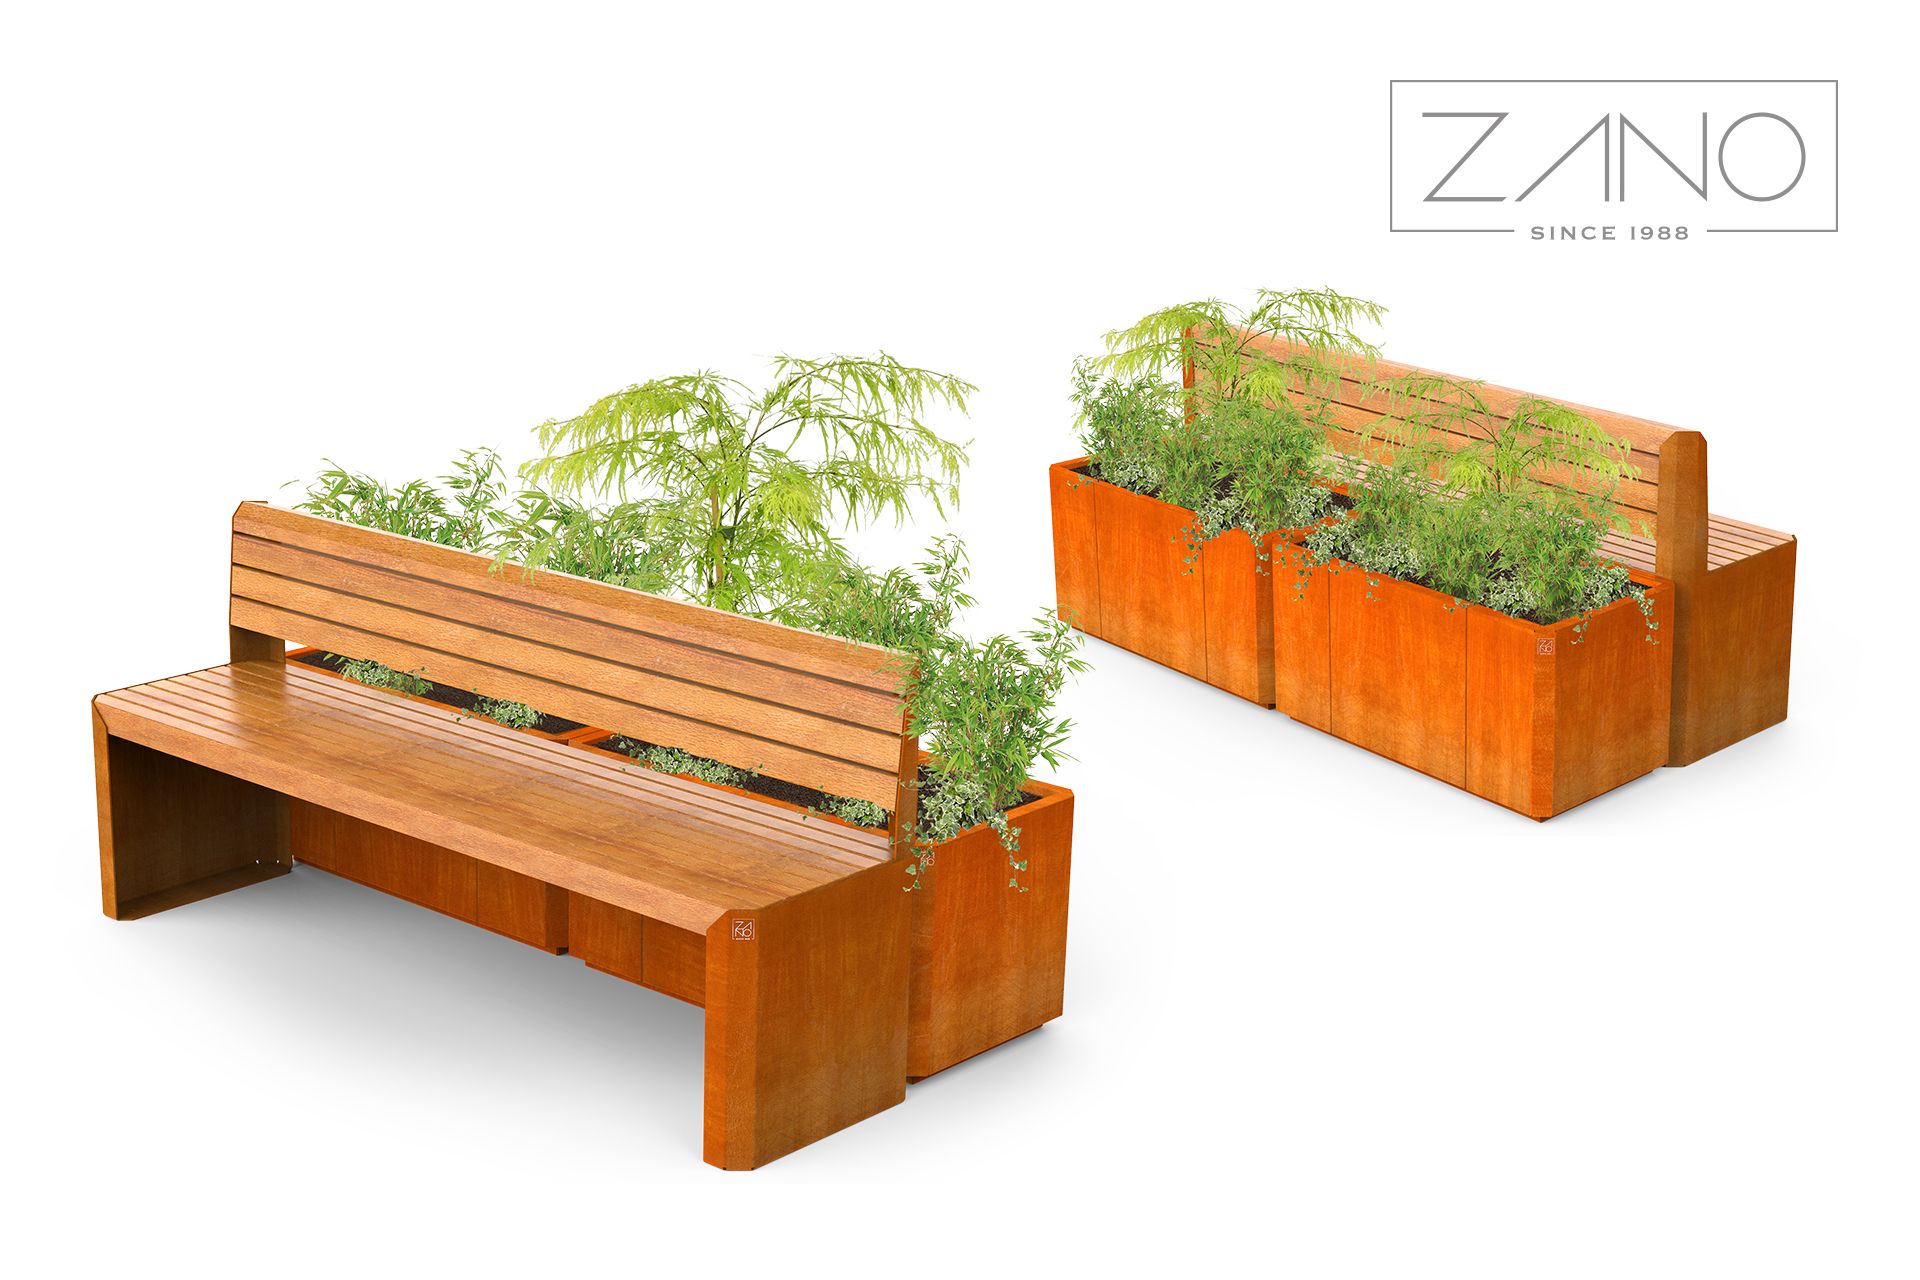 City benches and corten pots